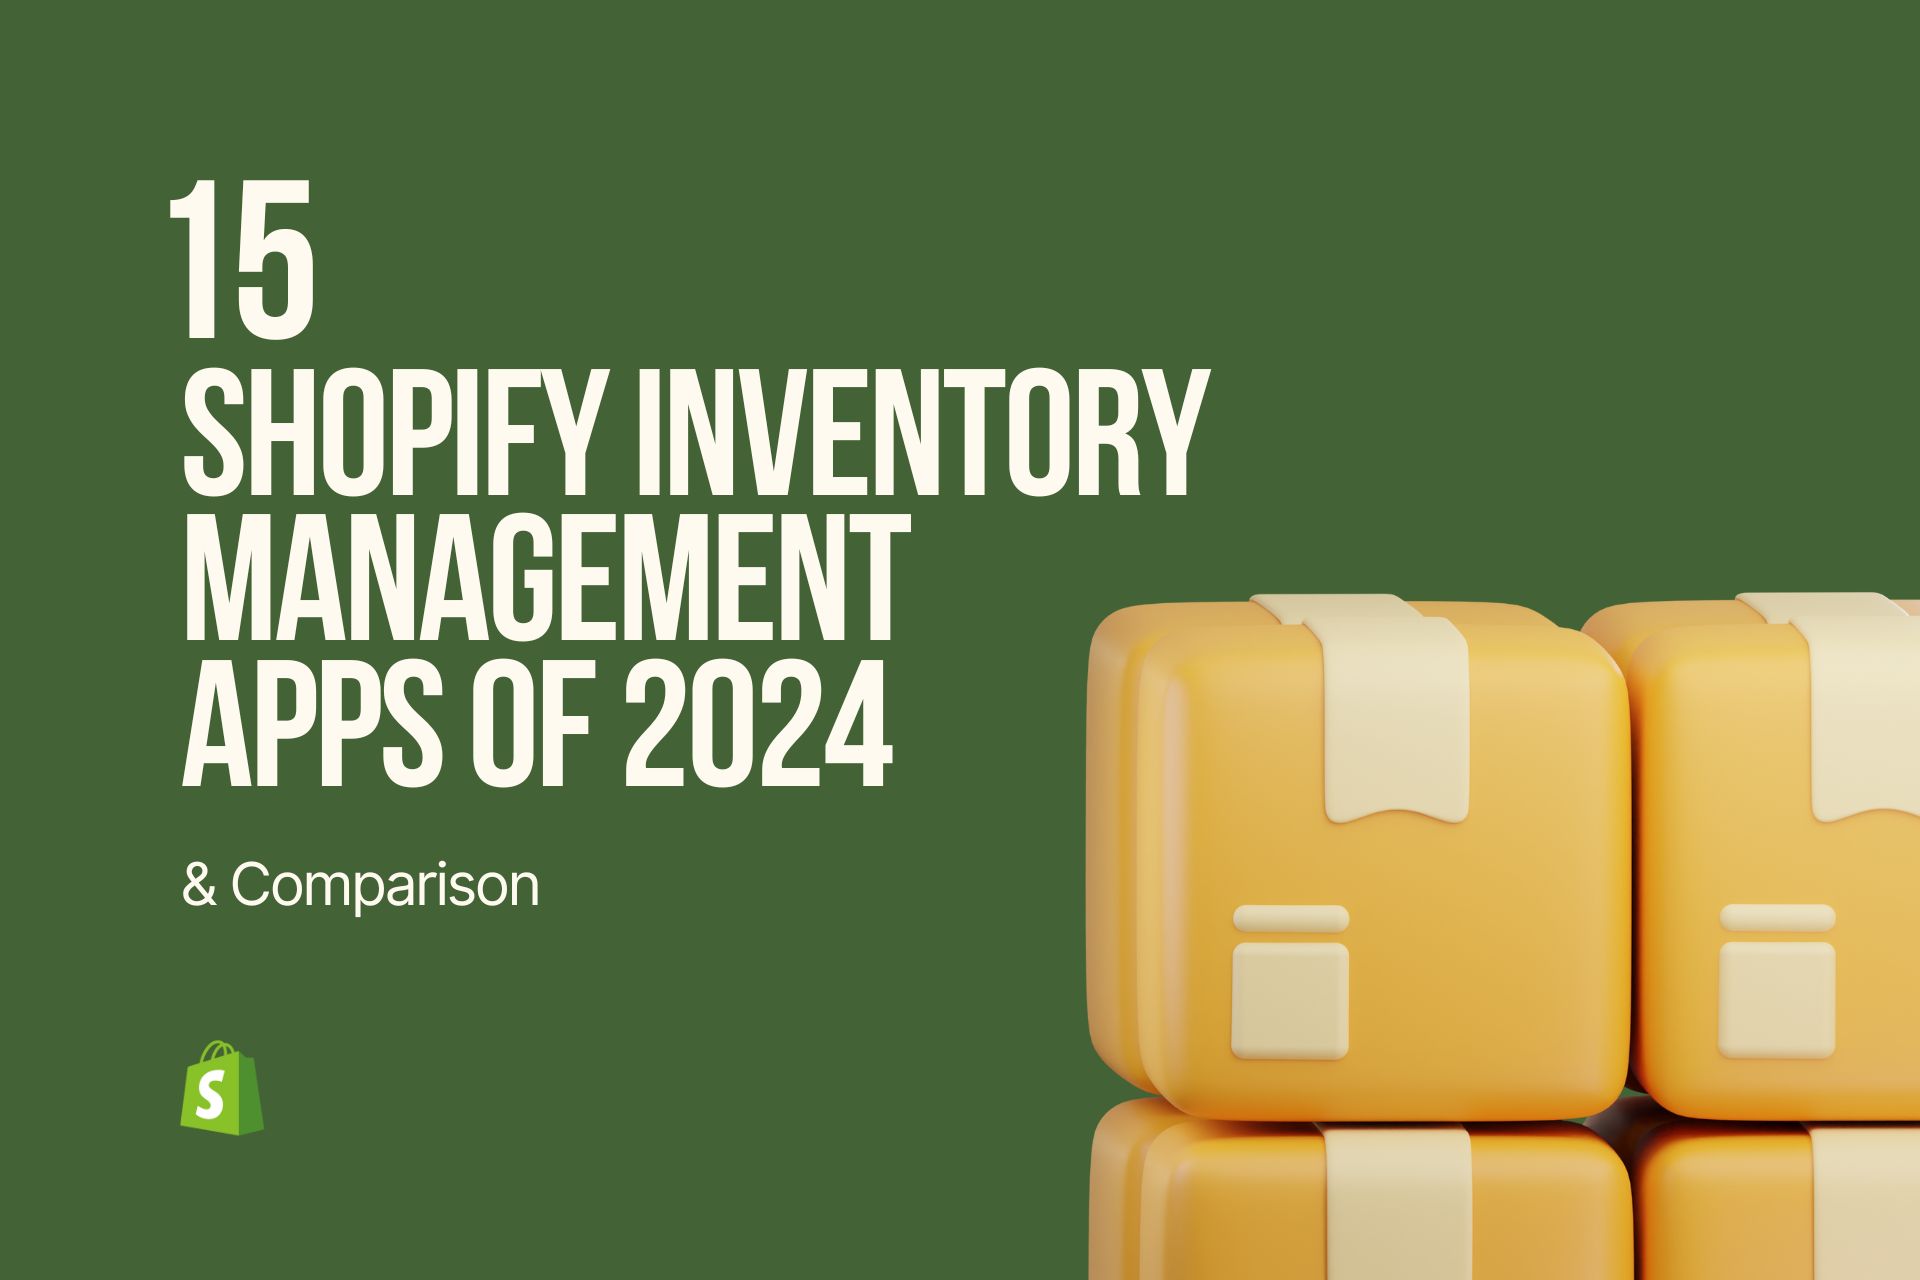 15 Shopify Inventory Management Apps of 2024 & Comparison